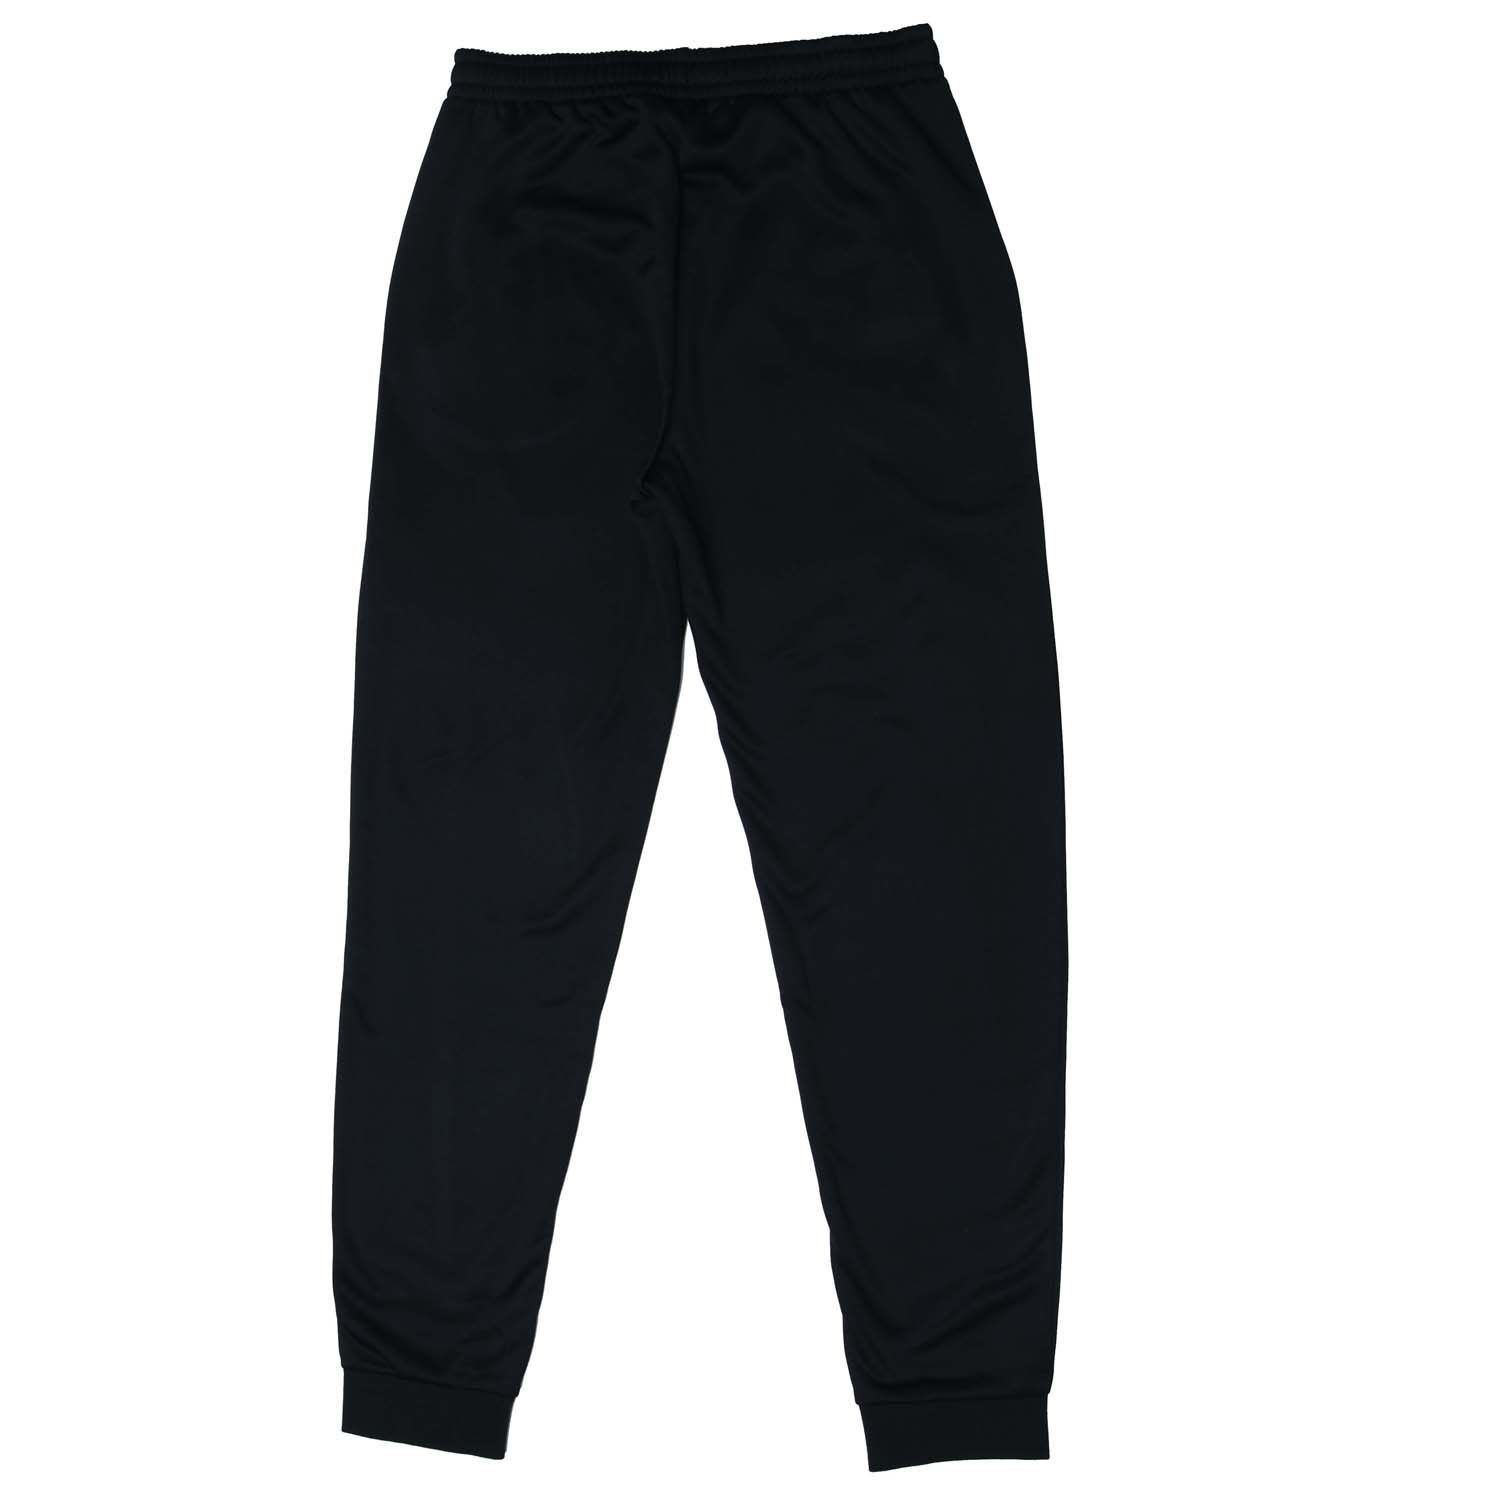 Junior Boys Lacoste Jog Pant in black- Elasticated waistband.- Zippered side pockets.- Ribbed cuffs.- Lacoste branding at the pockets.- Iconic Croc logo to the thigh.- Slim  tapered legs for a streamlined fit.- Body: 100% Polyester. Rib Edge: 97% Cotton  3% Elastane.- Ref: XJ8081C31